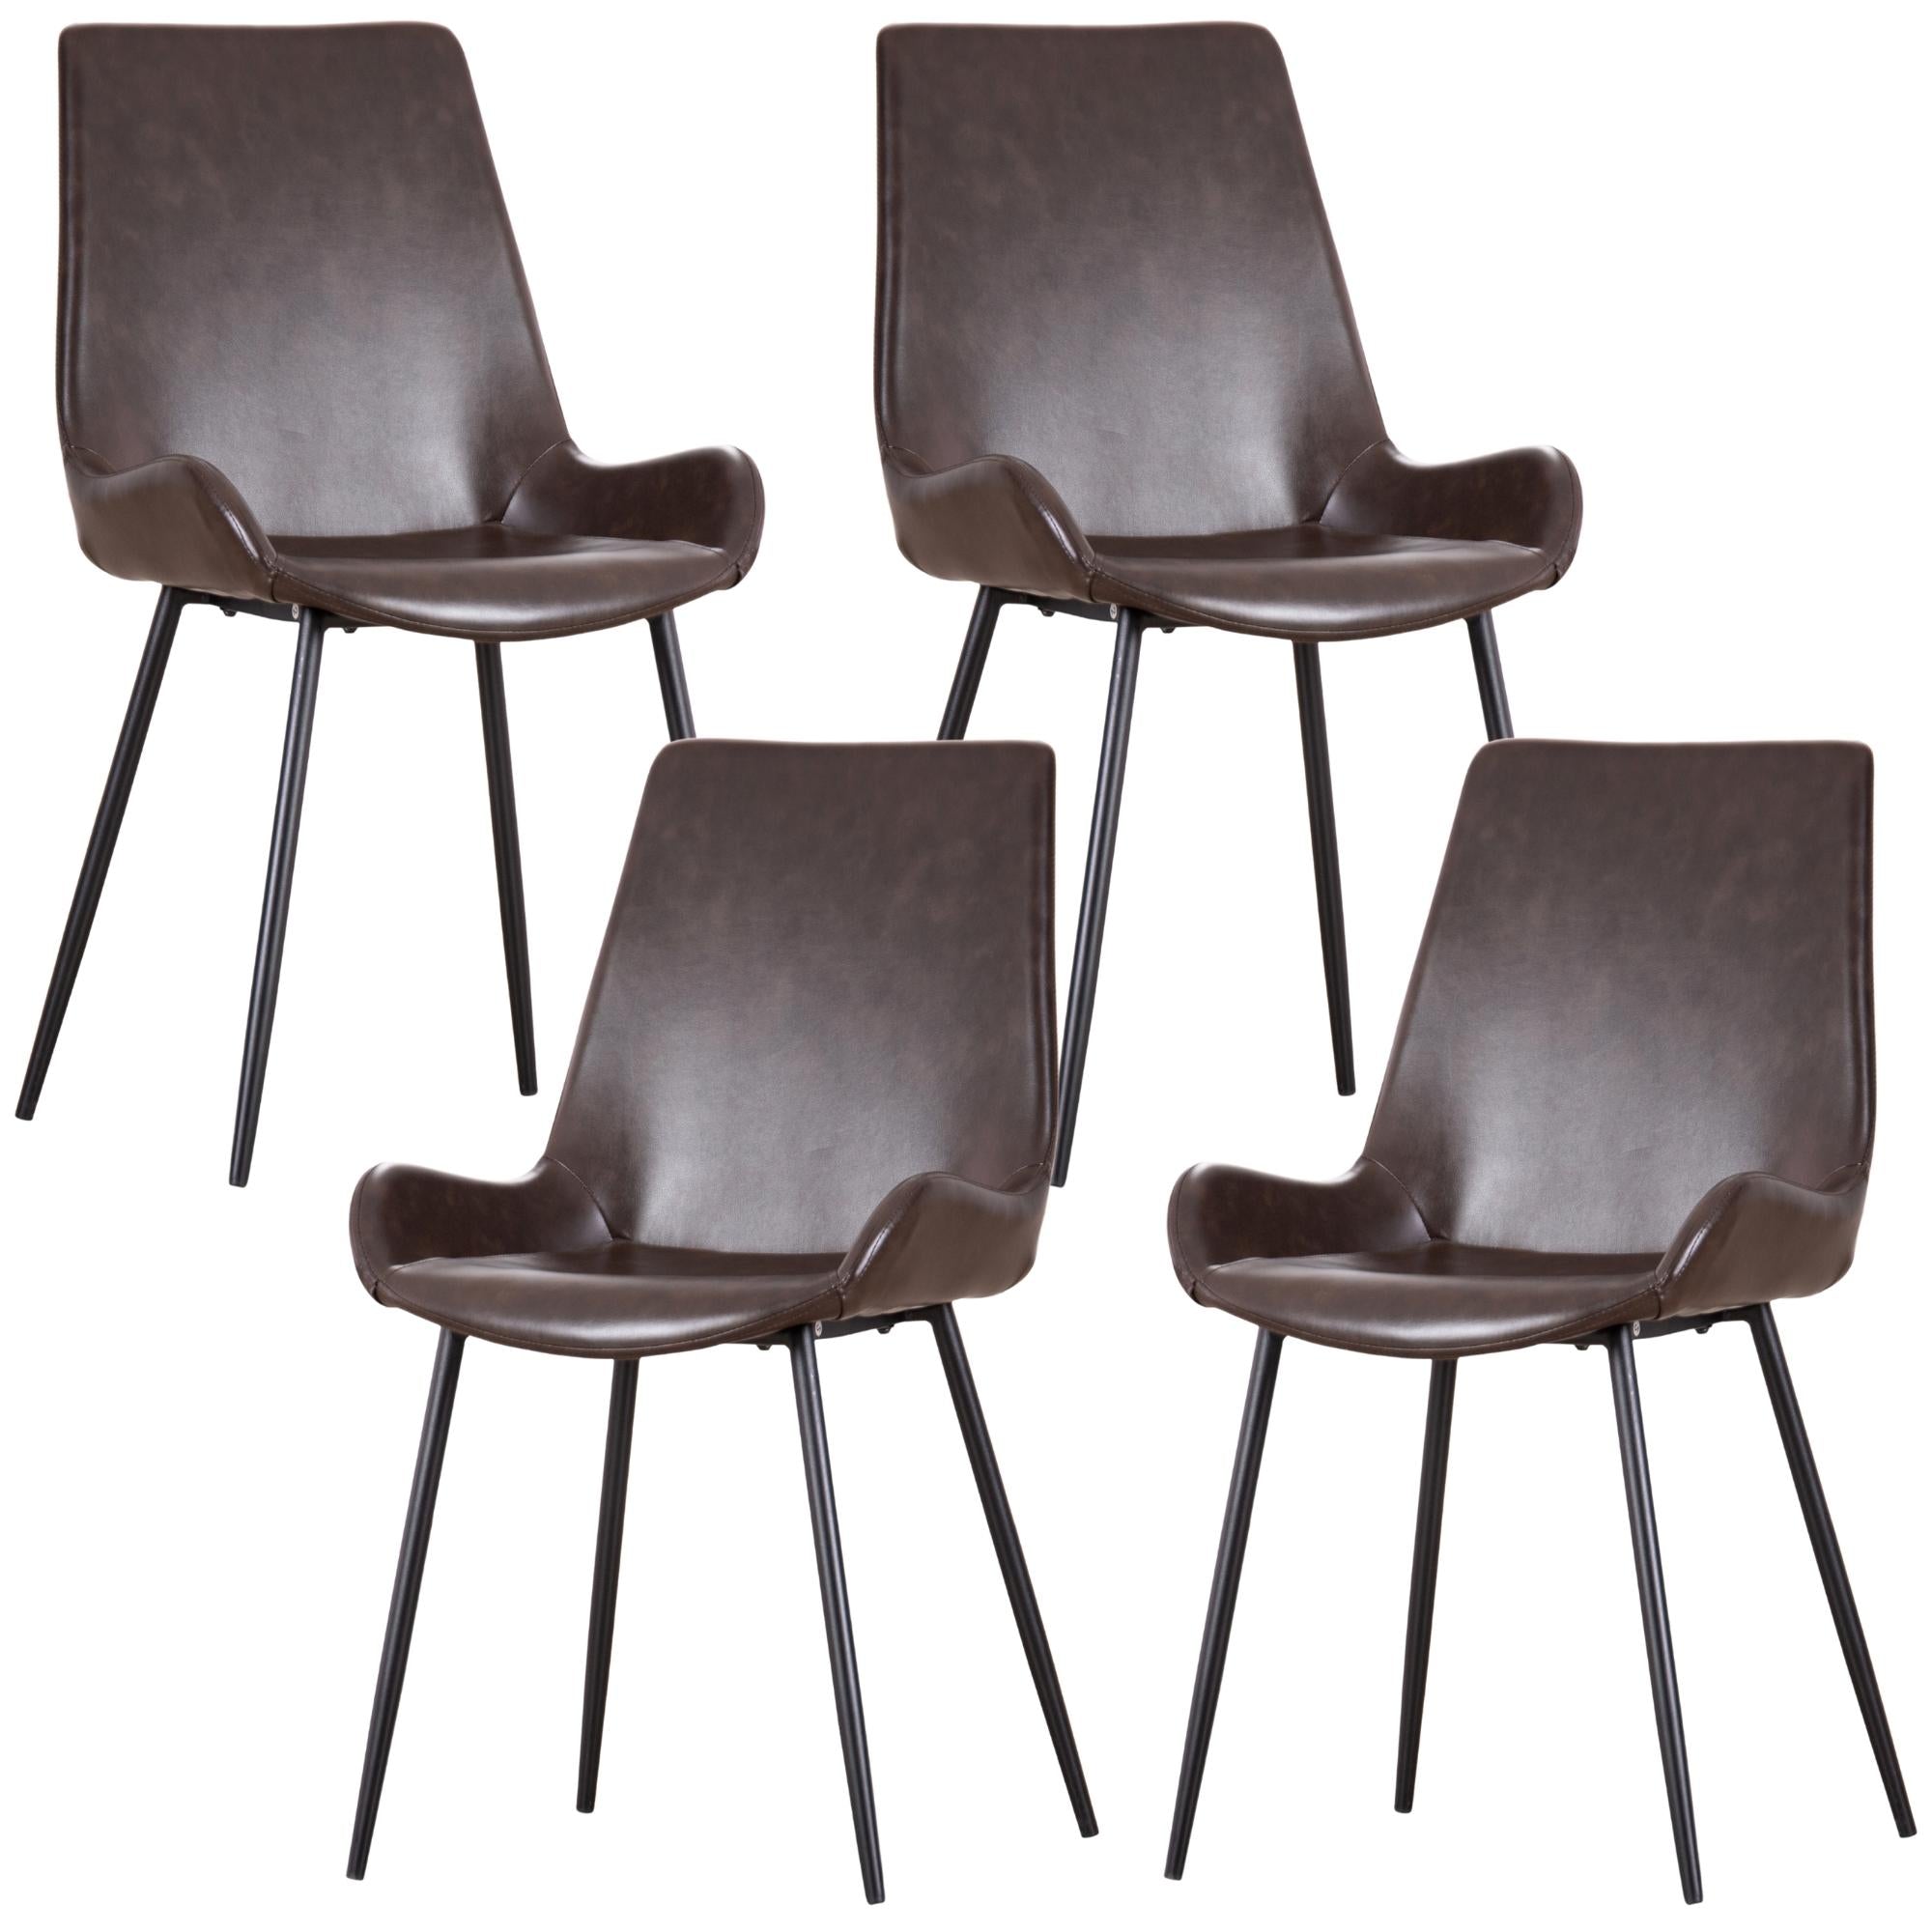 Brando  Set of 4 PU Leather Upholstered Dining Chair Metal Leg - Brown